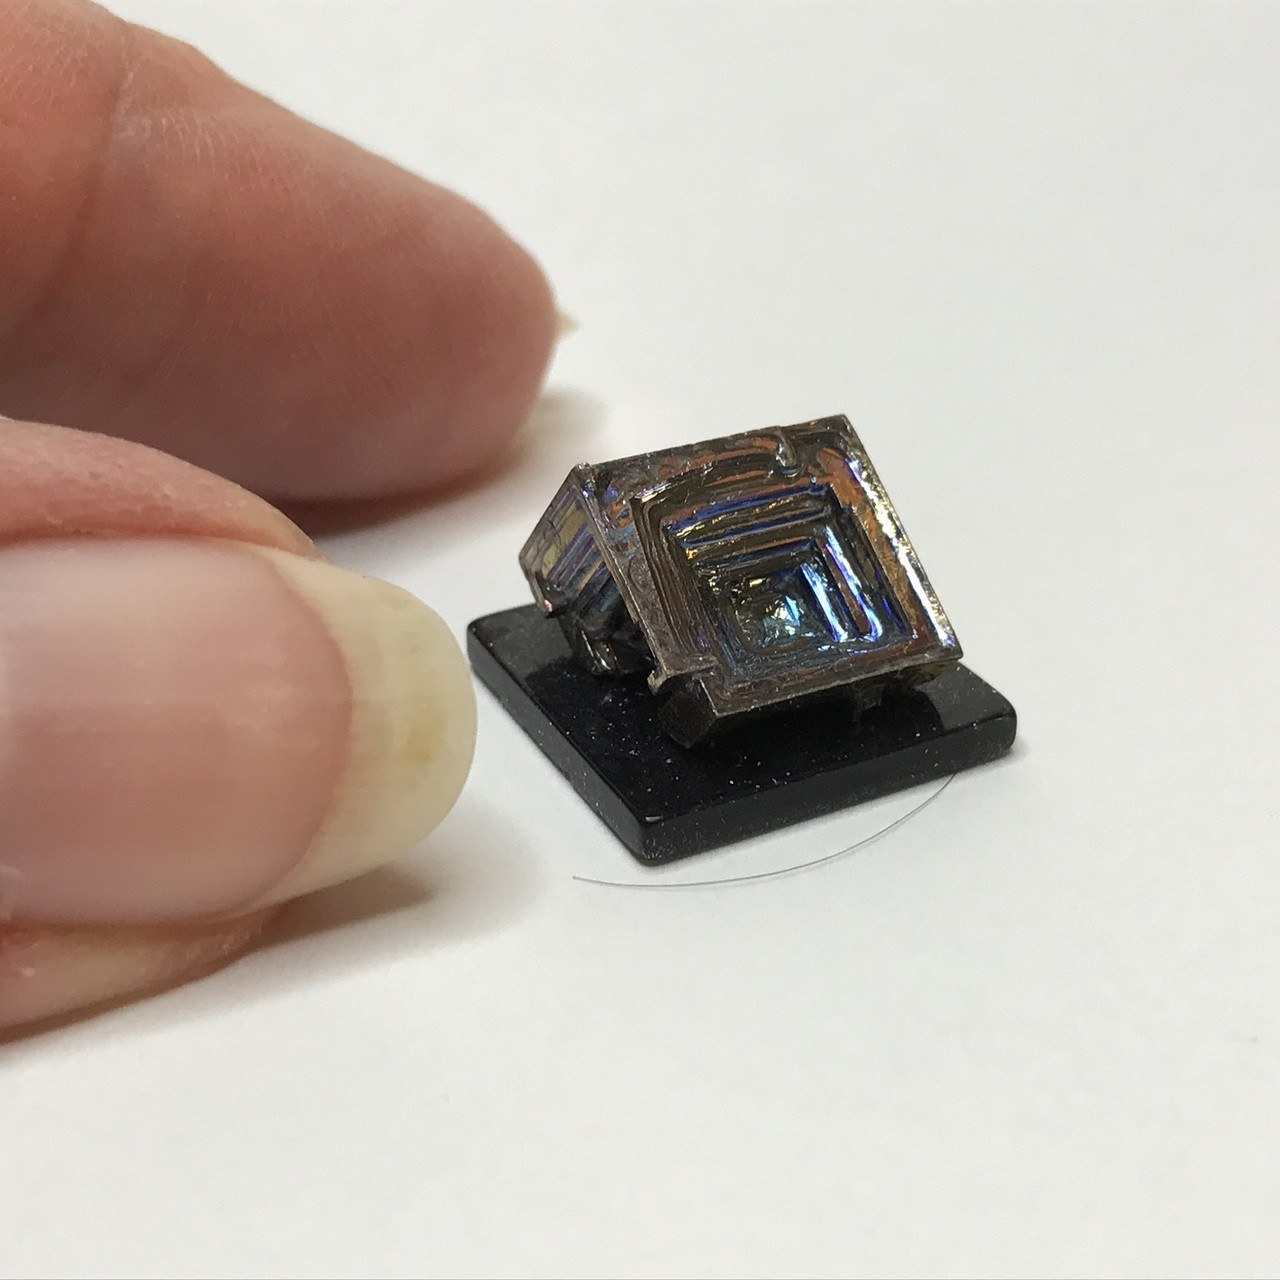 Crystalline Bismuth miniature sculpture shown with fingers for scale